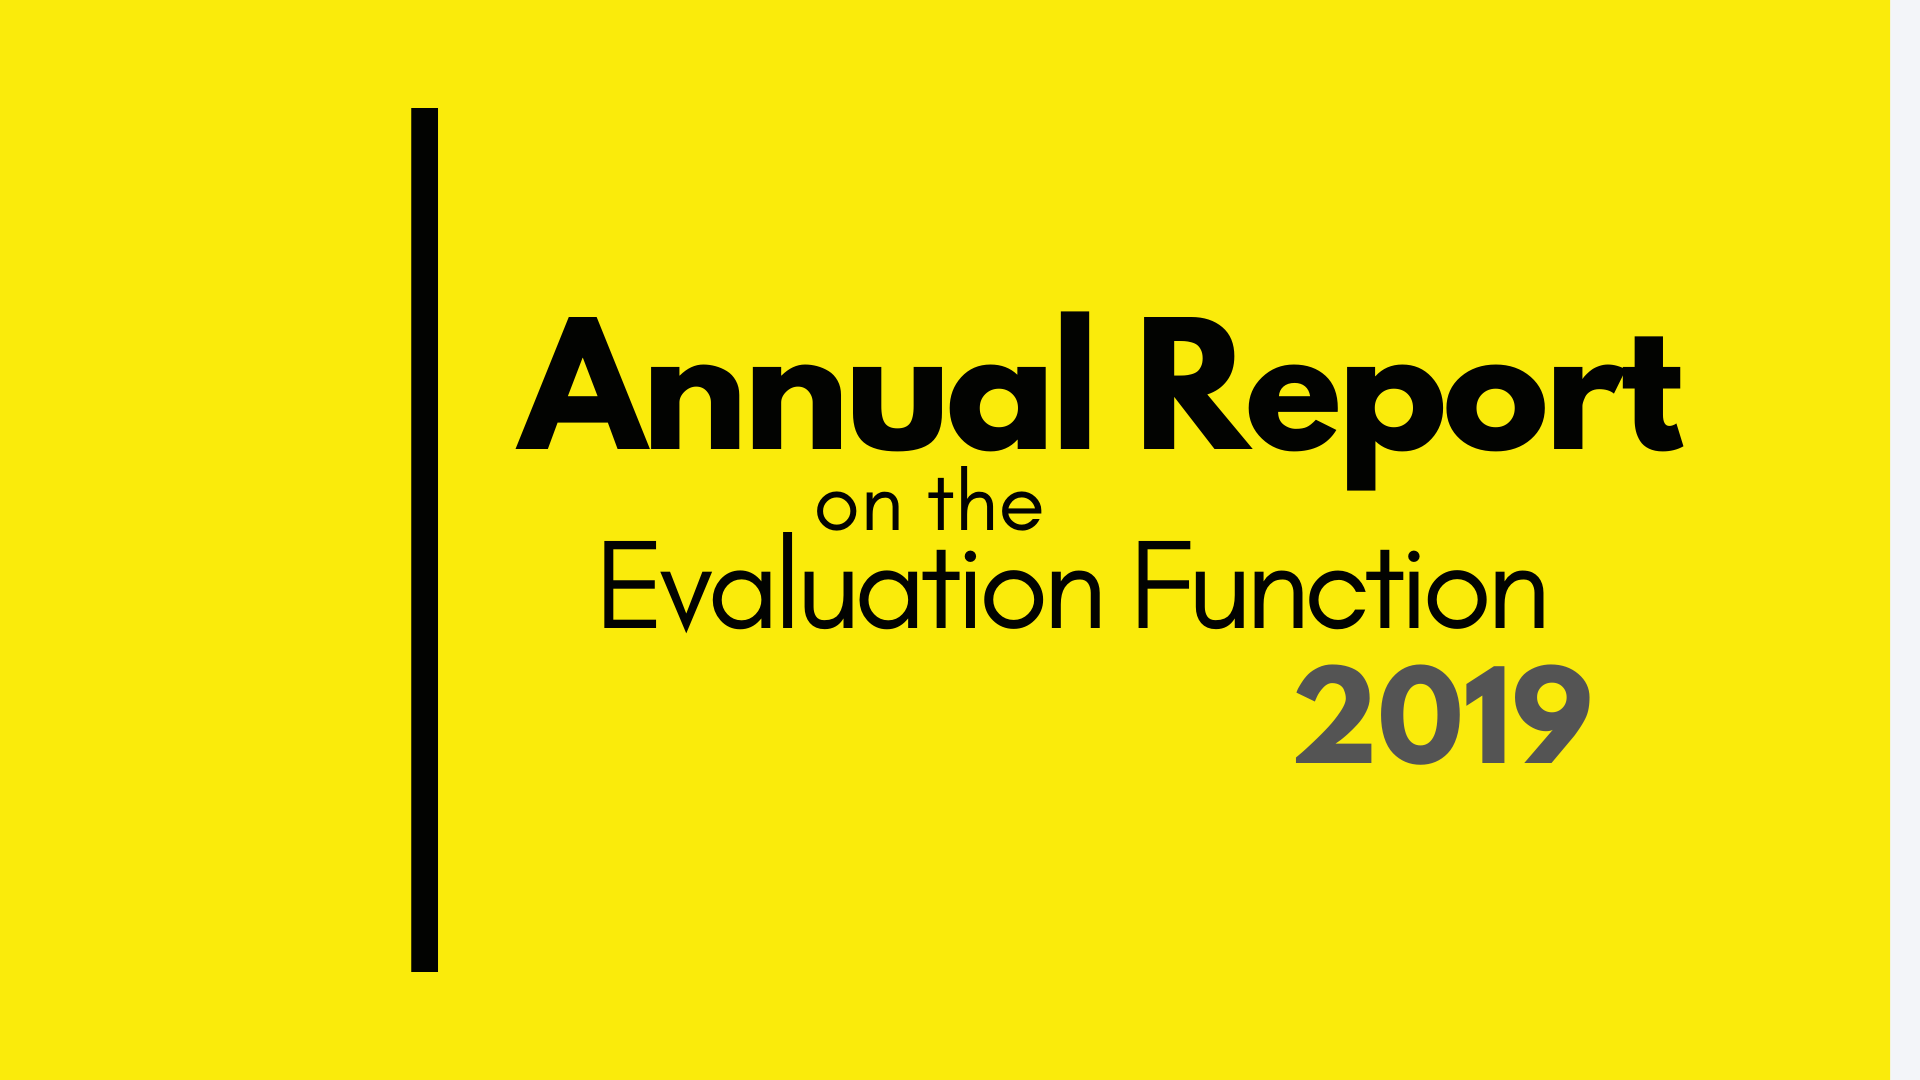 Annual Report on the evaluation function 2019